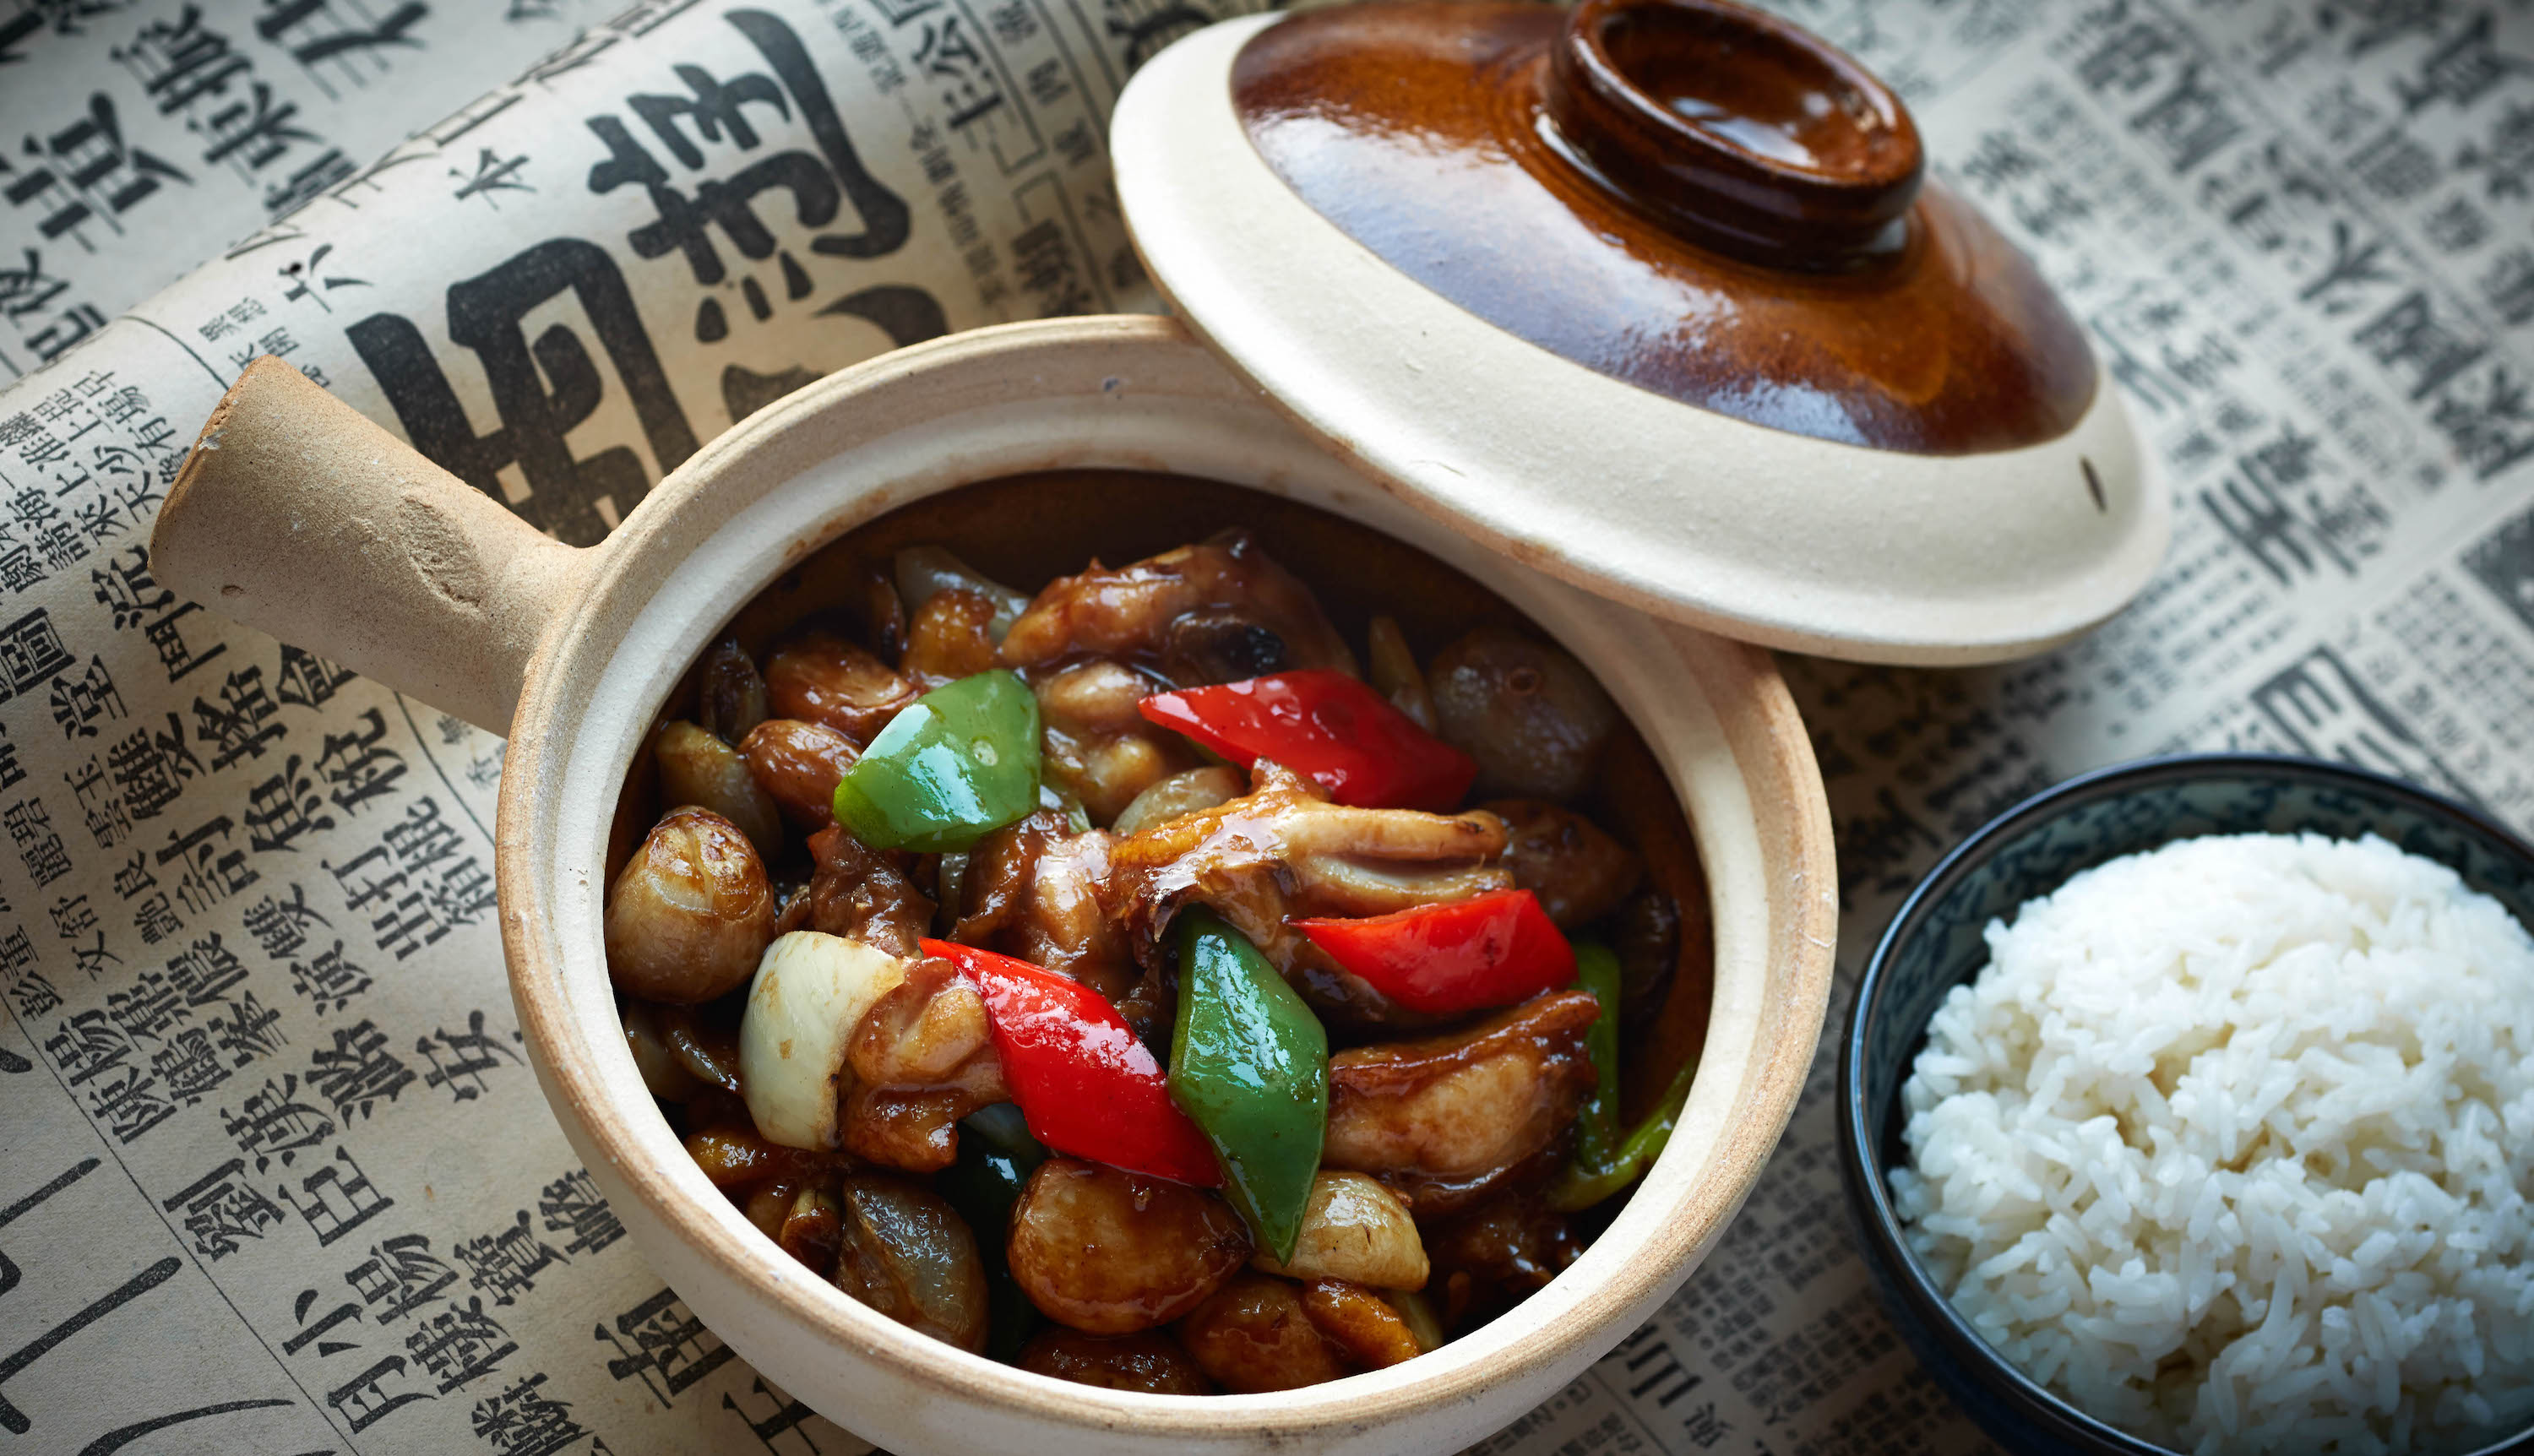 Hong Kong’s best sizzling claypot dishes for winter